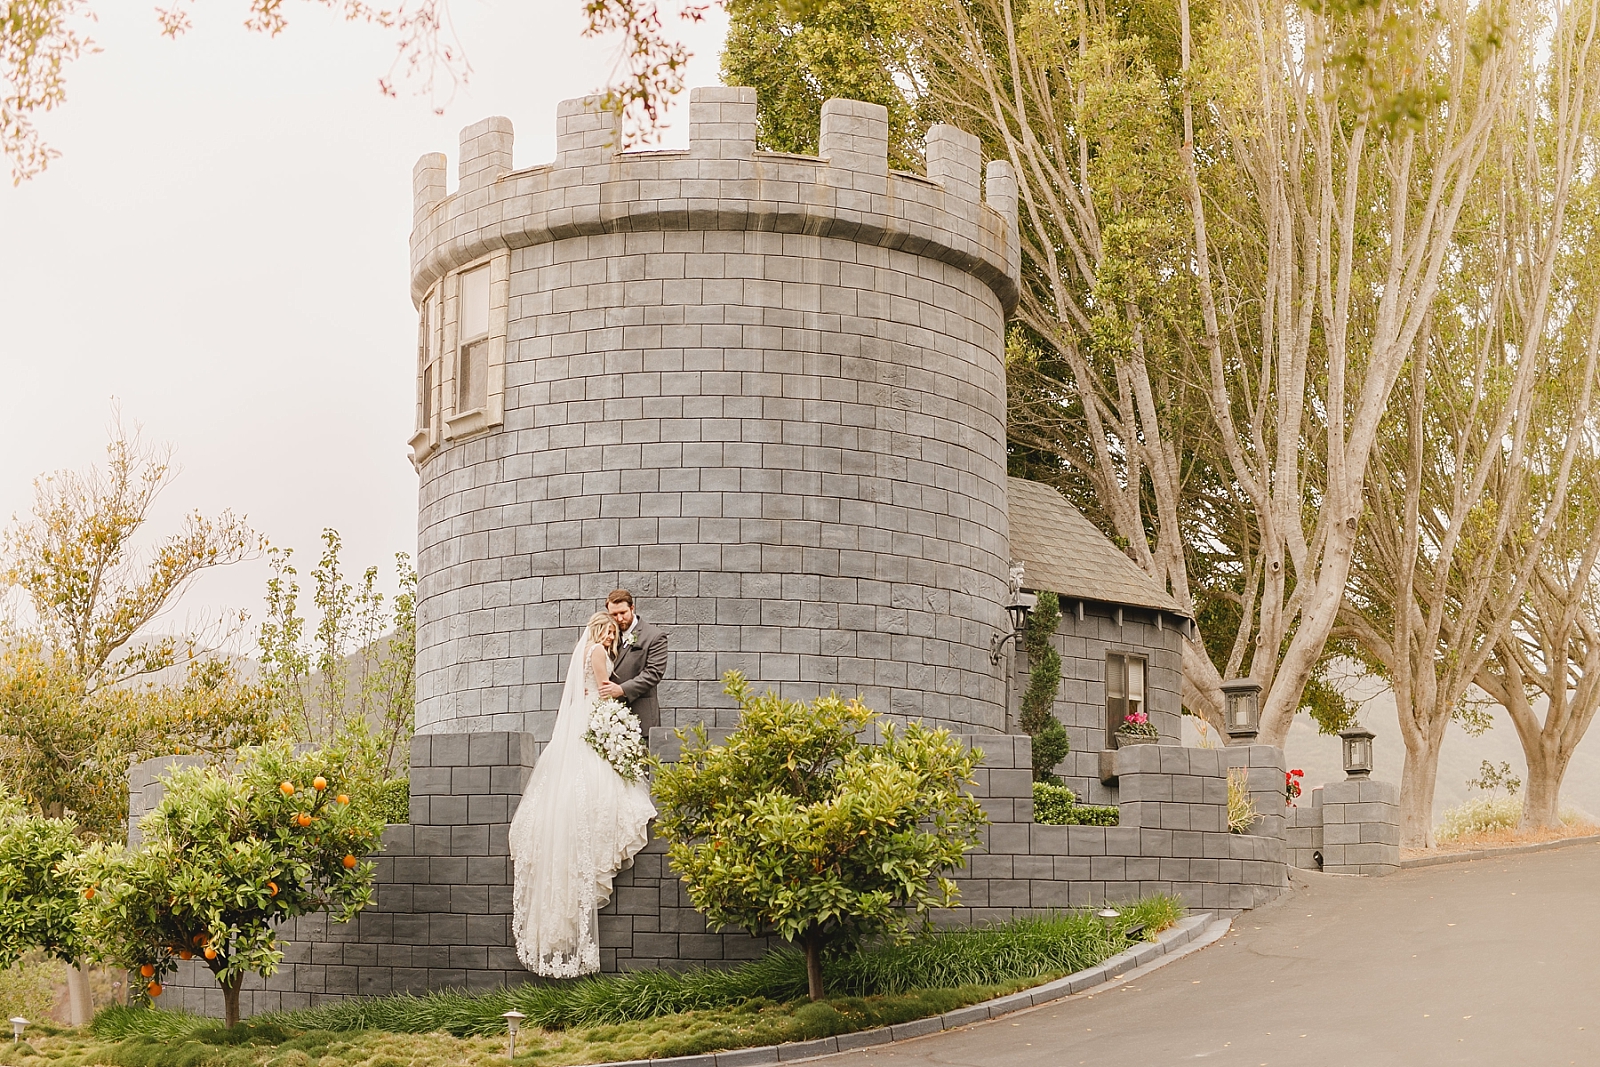 Lord of the rings themed wedding in temecula California